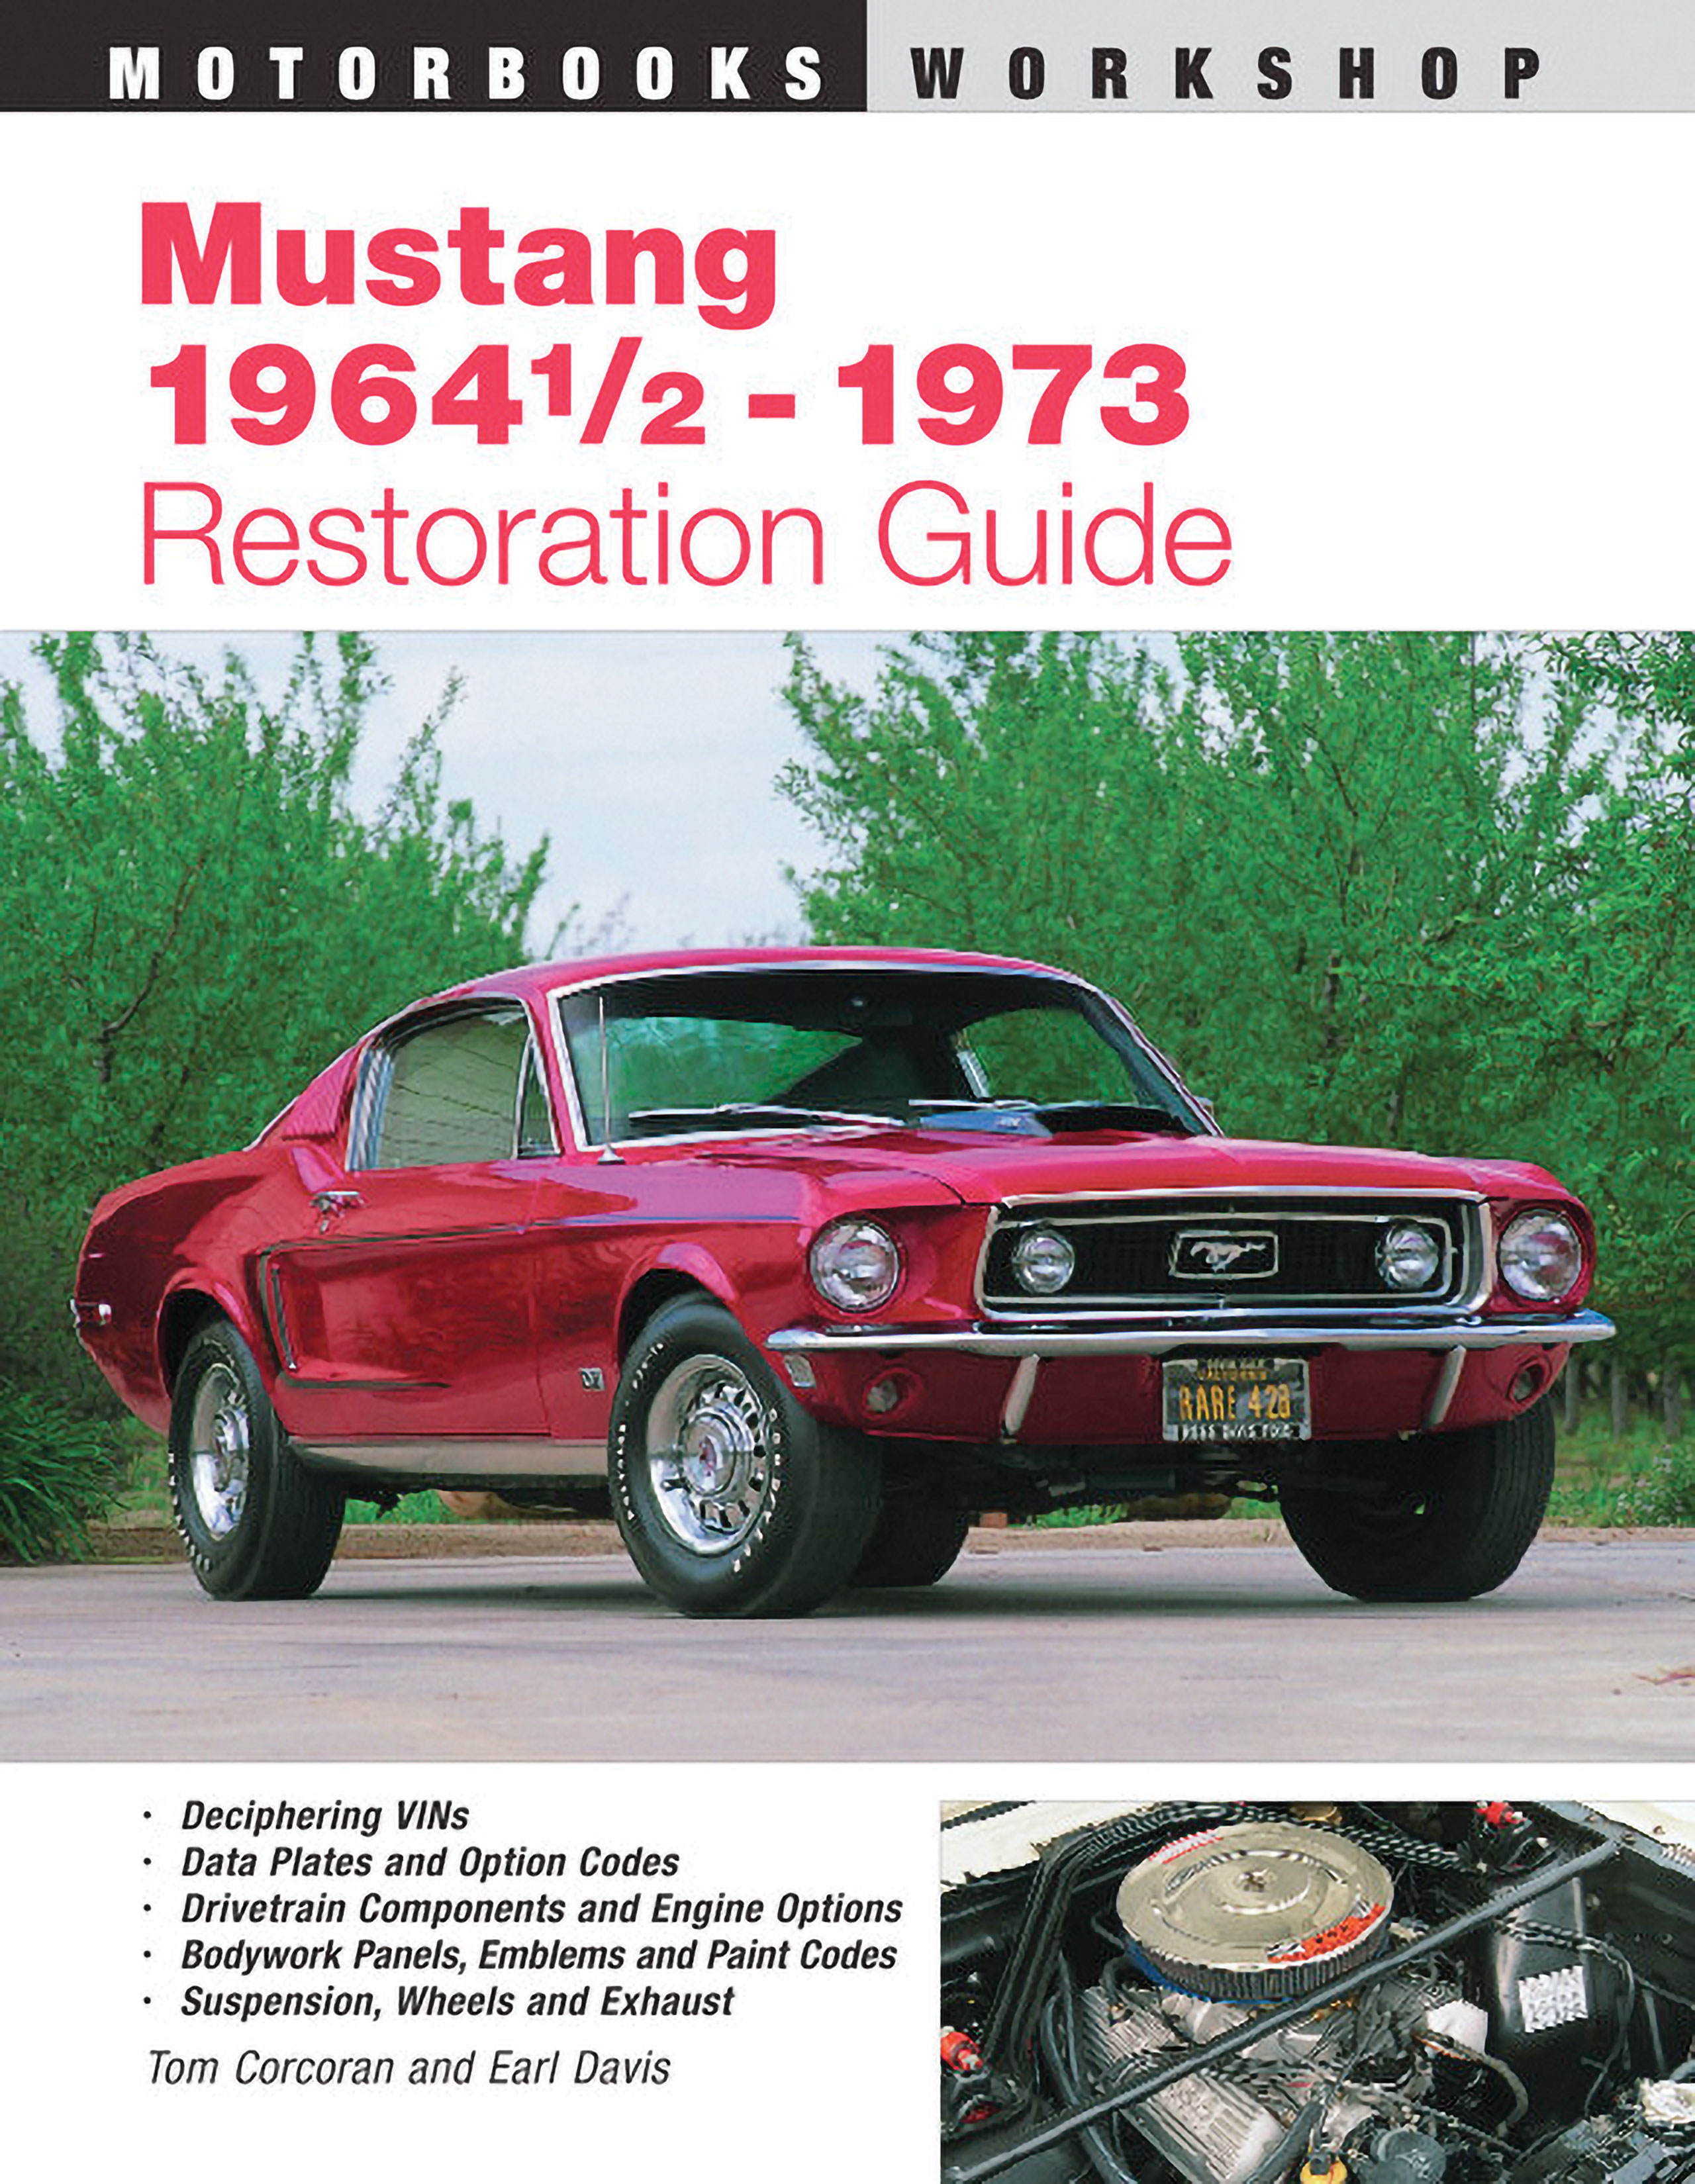 First Generation 1964-1973 Ford Mustang Motorbooks International Complete Mustang Restoration Guide - Auto Accessories of America